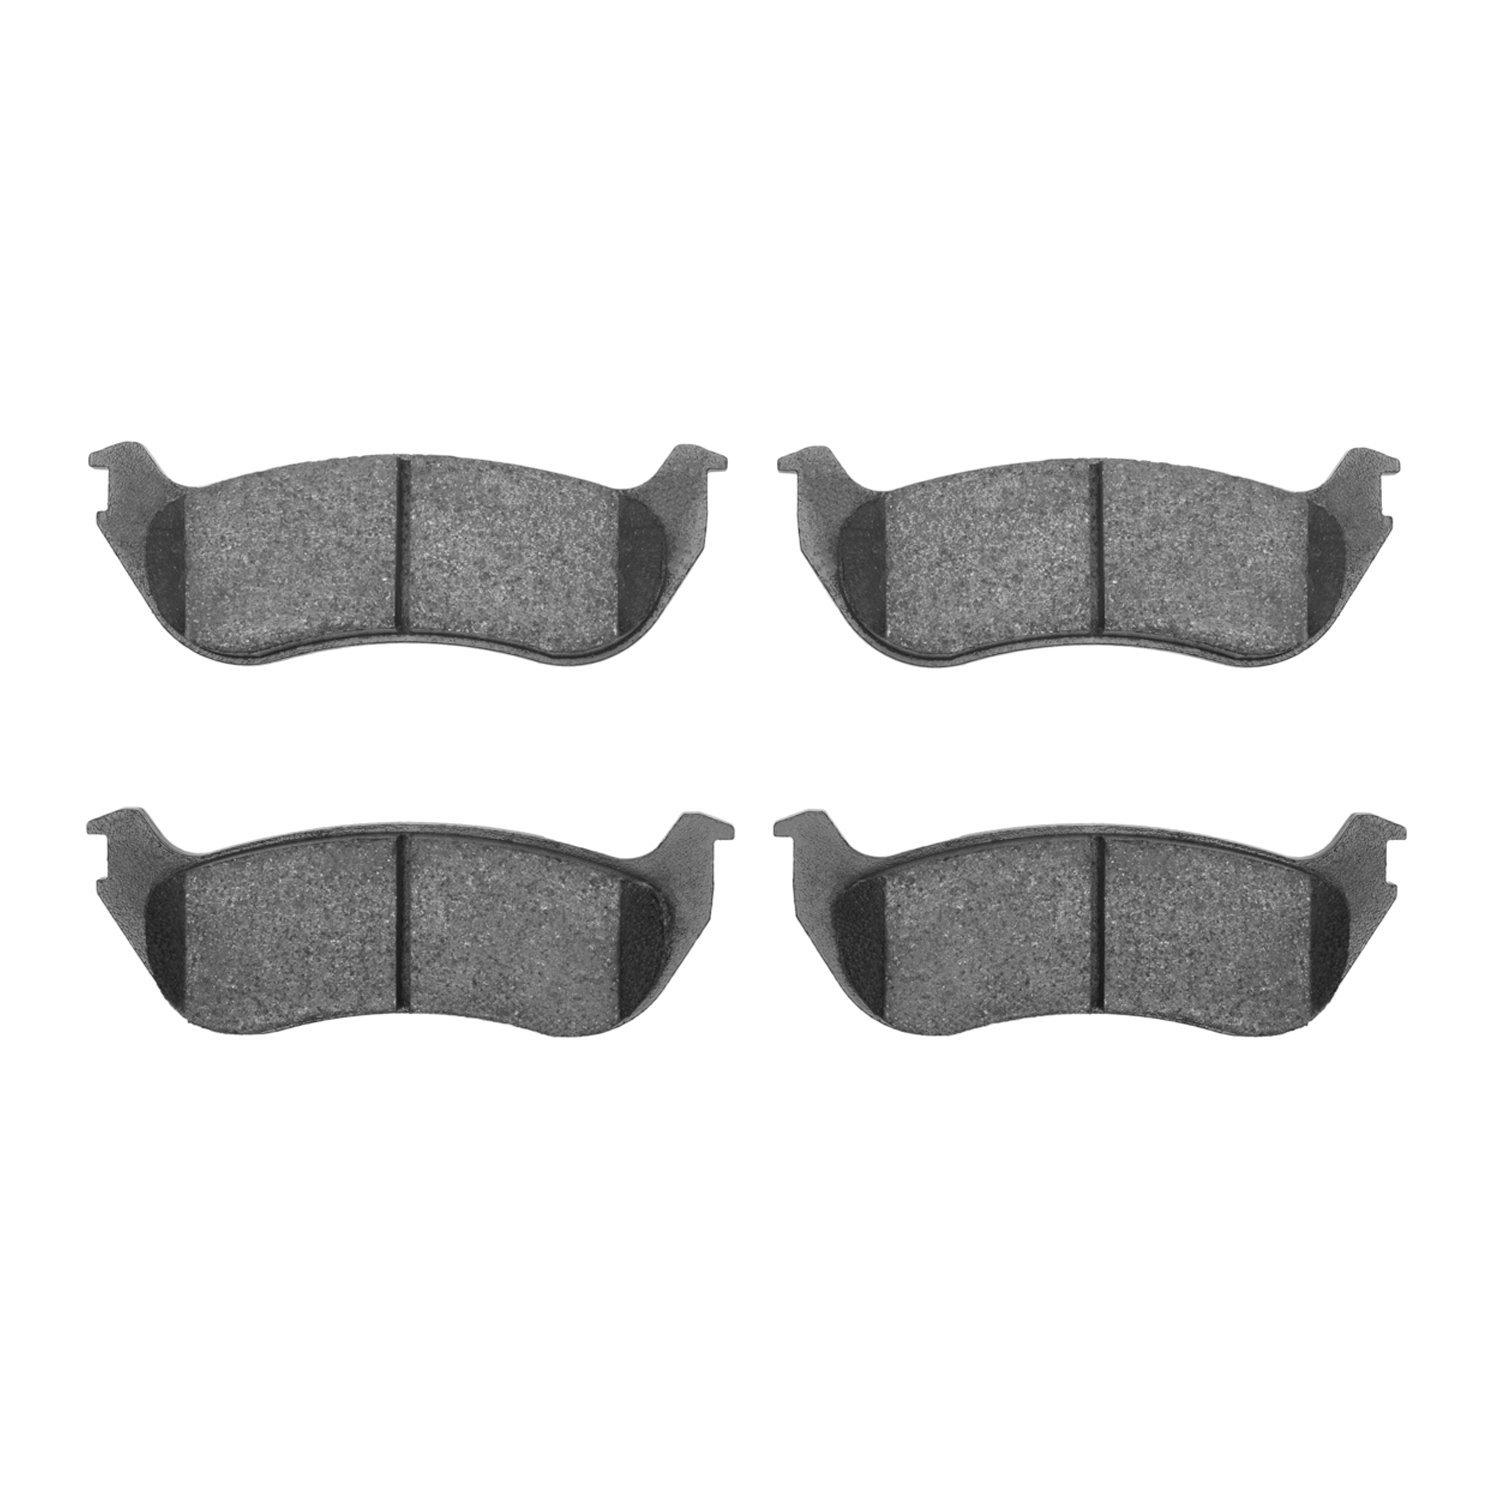 1400-0881-00 Ultimate-Duty Brake Pads Kit, 2002-2005 Ford/Lincoln/Mercury/Mazda, Position: Rear